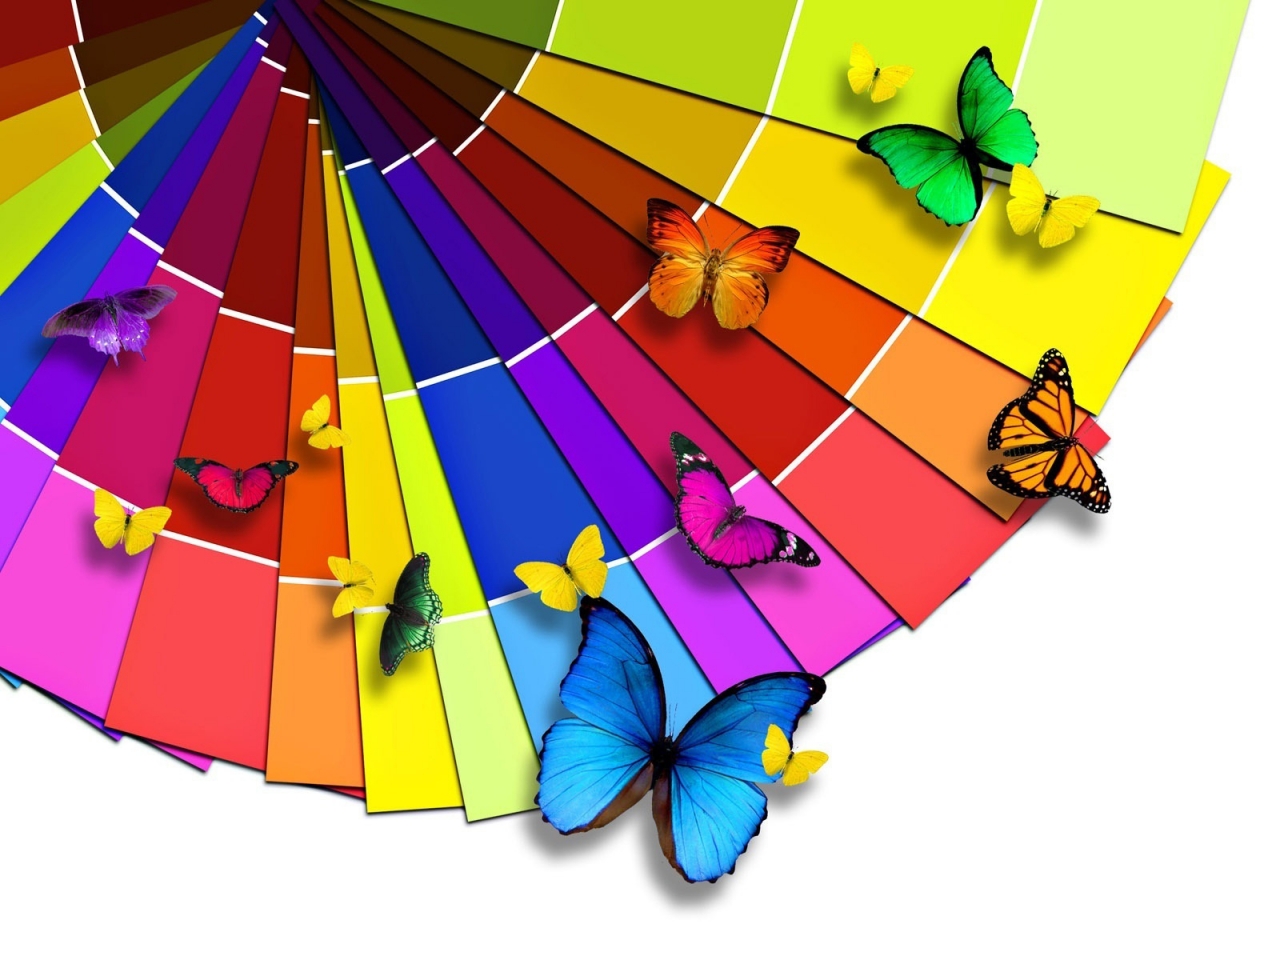 Butterfly Range for 1280 x 960 resolution